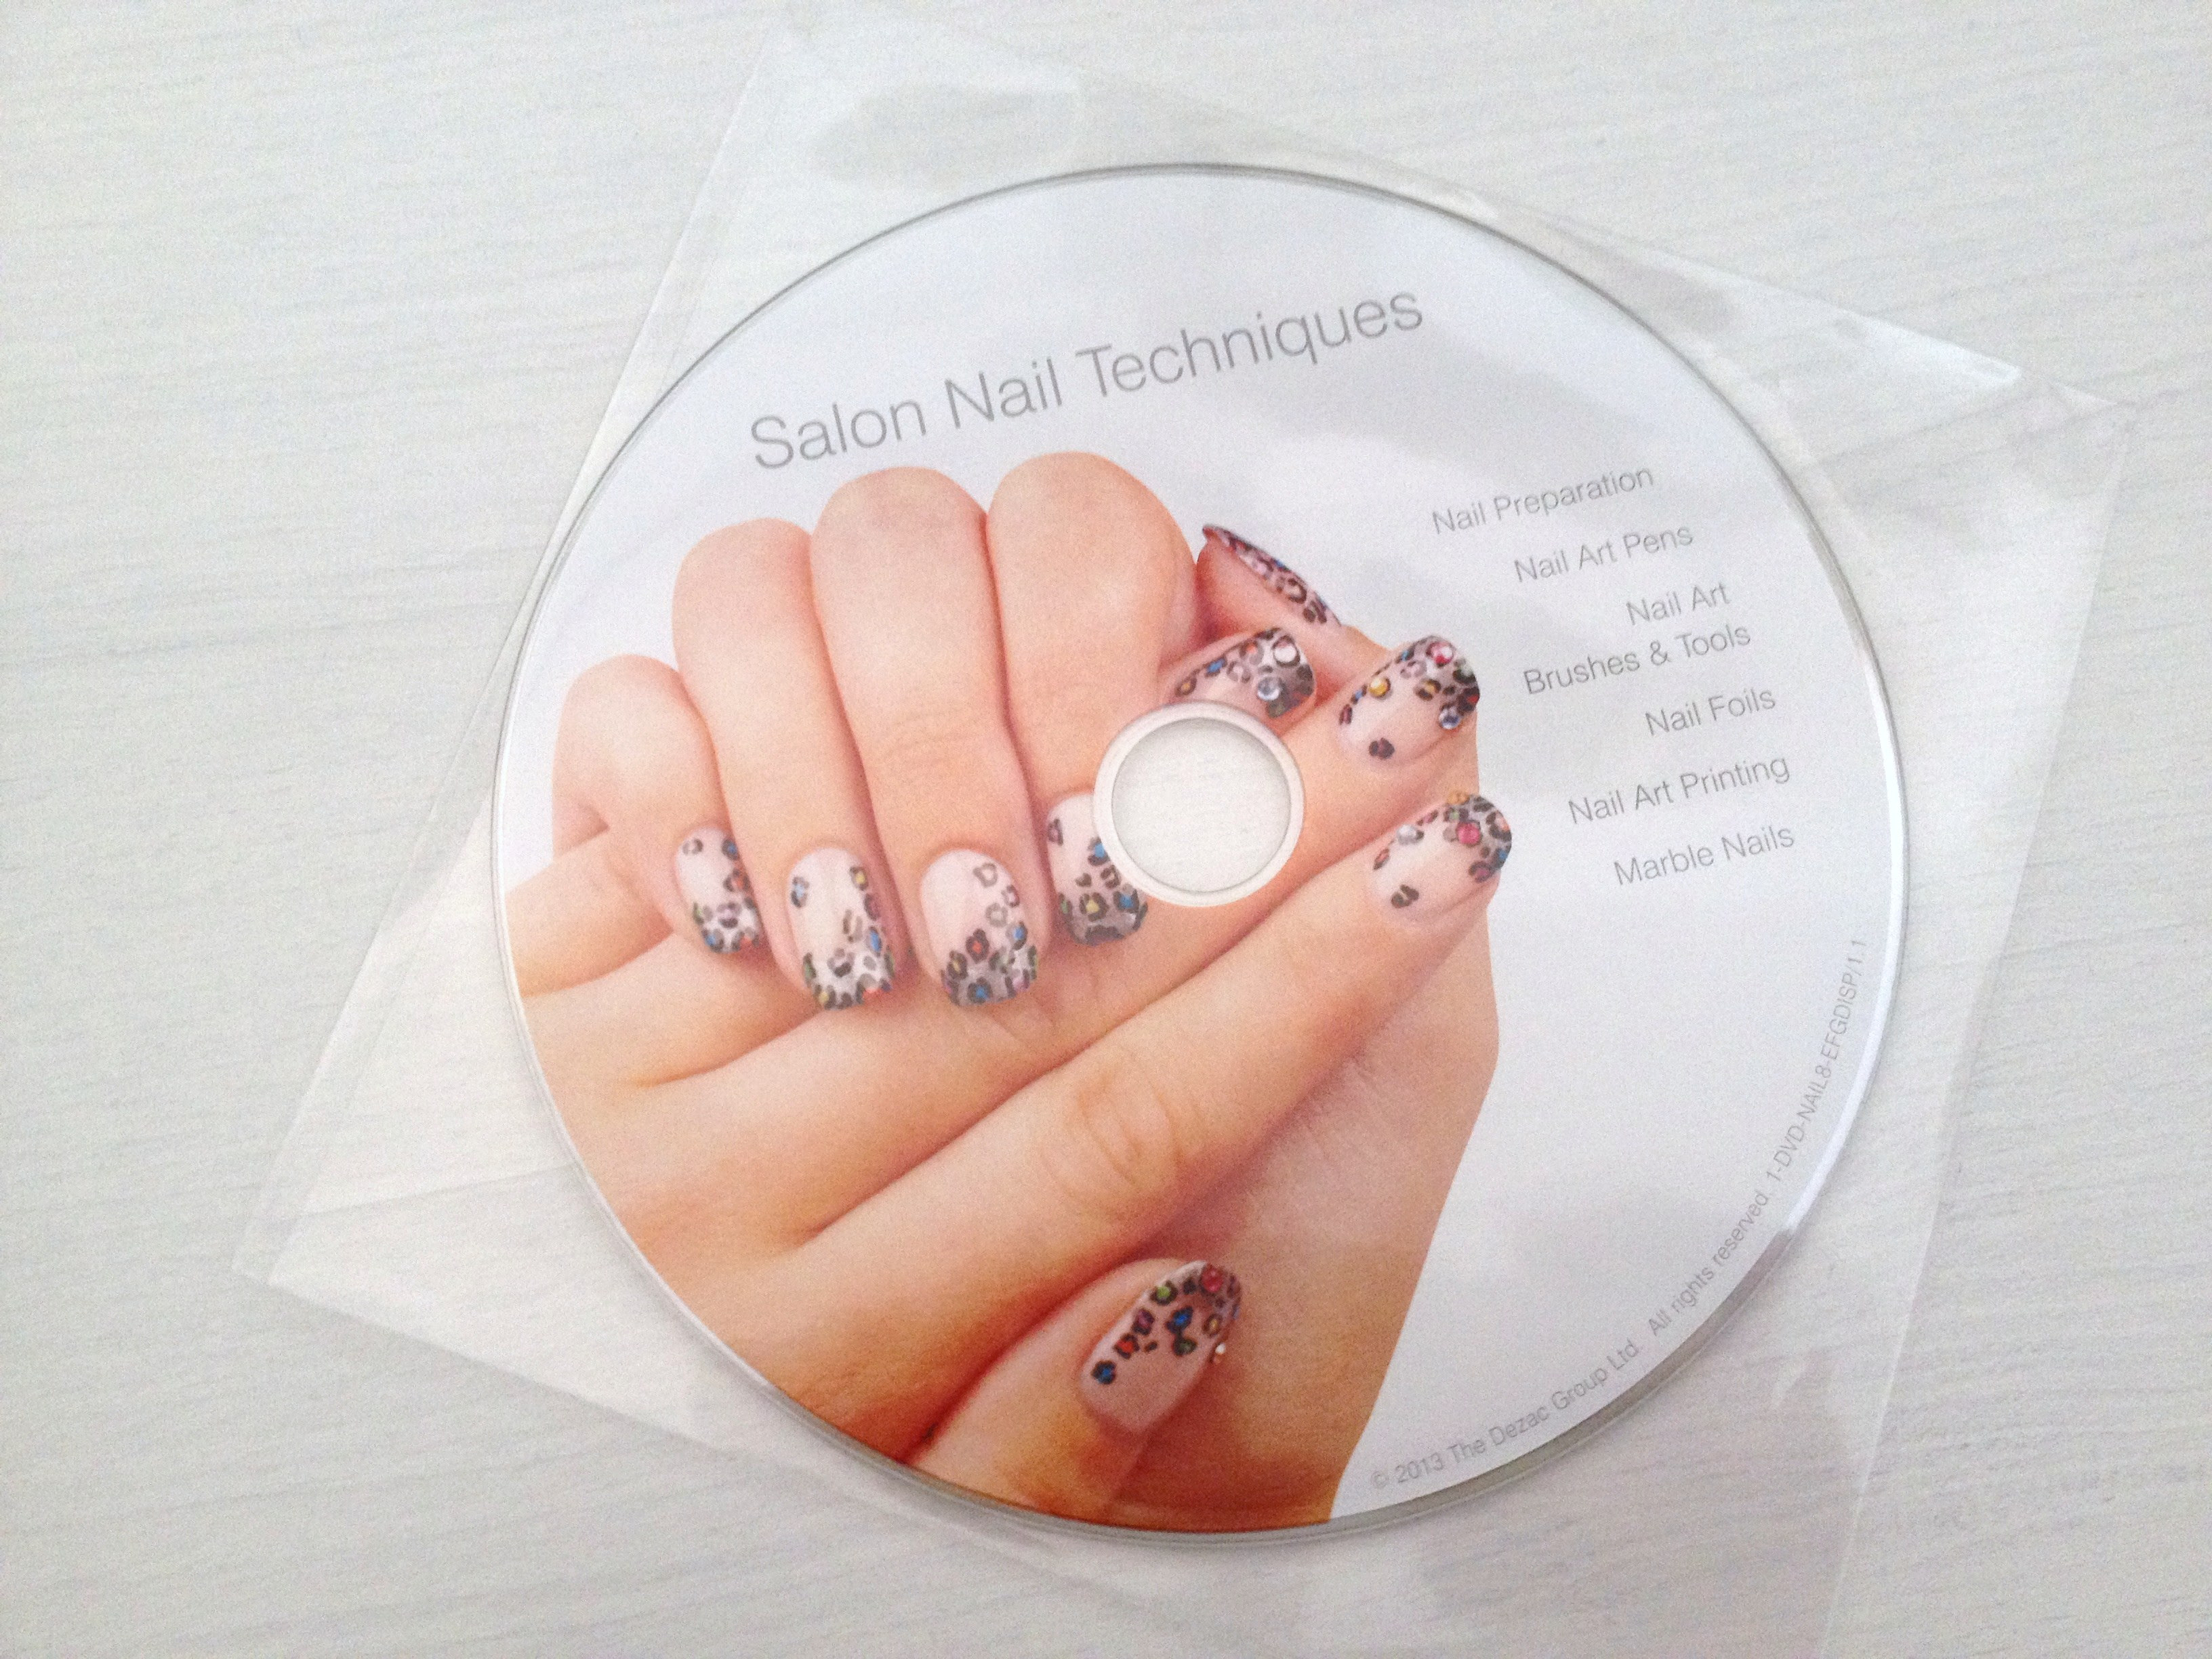 3. Ultimate Nail Art Collection: The Complete Guide - wide 6